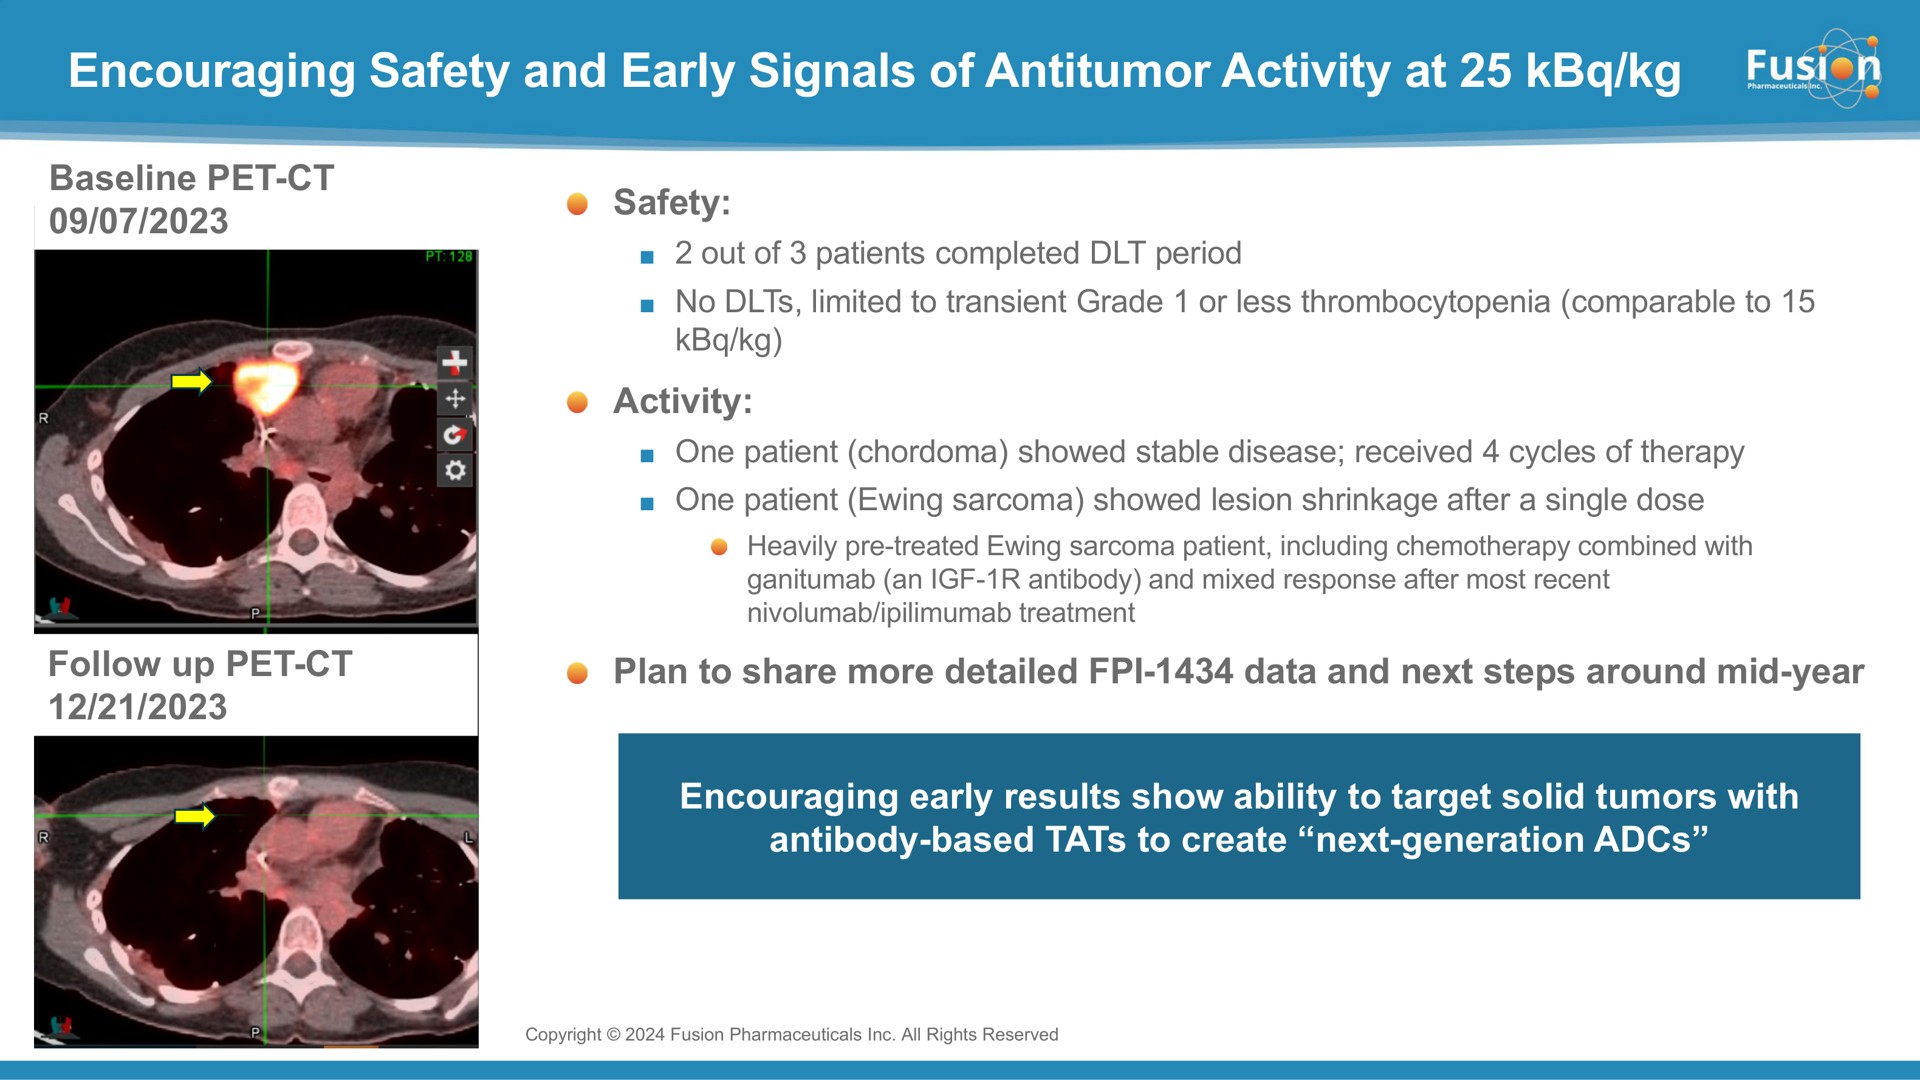 encouraging safety and early signals of activity at pet | Fusion Pharmaceuticals